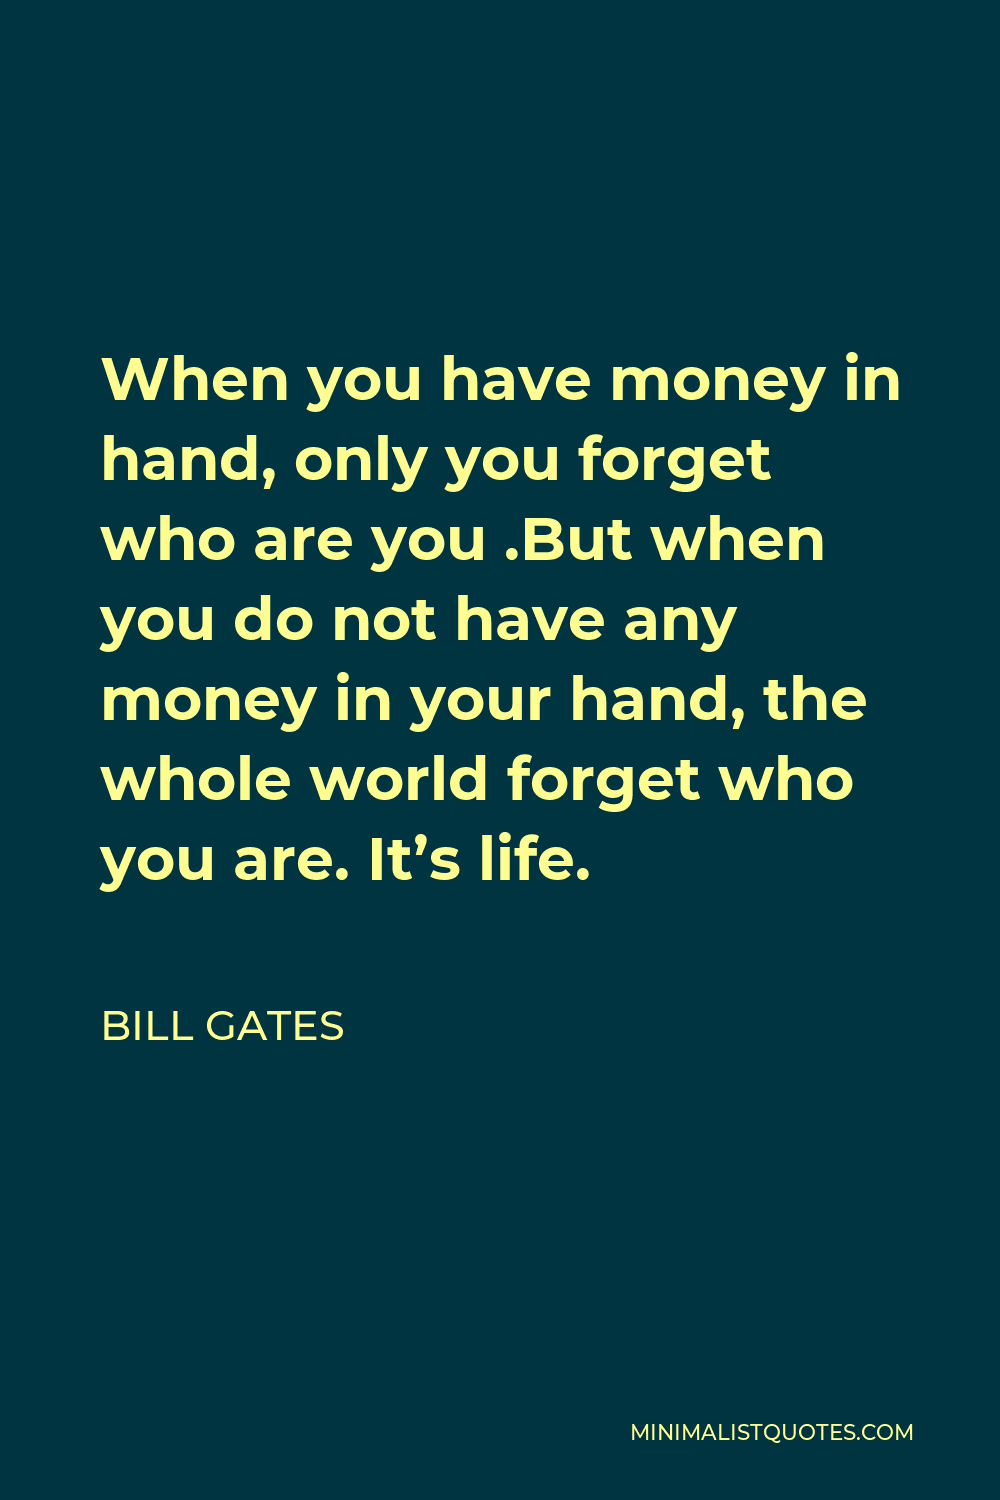 Bill Gates Quote - When you have money in hand, only you forget who are you .But when you do not have any money in your hand, the whole world forget who you are. It’s life.